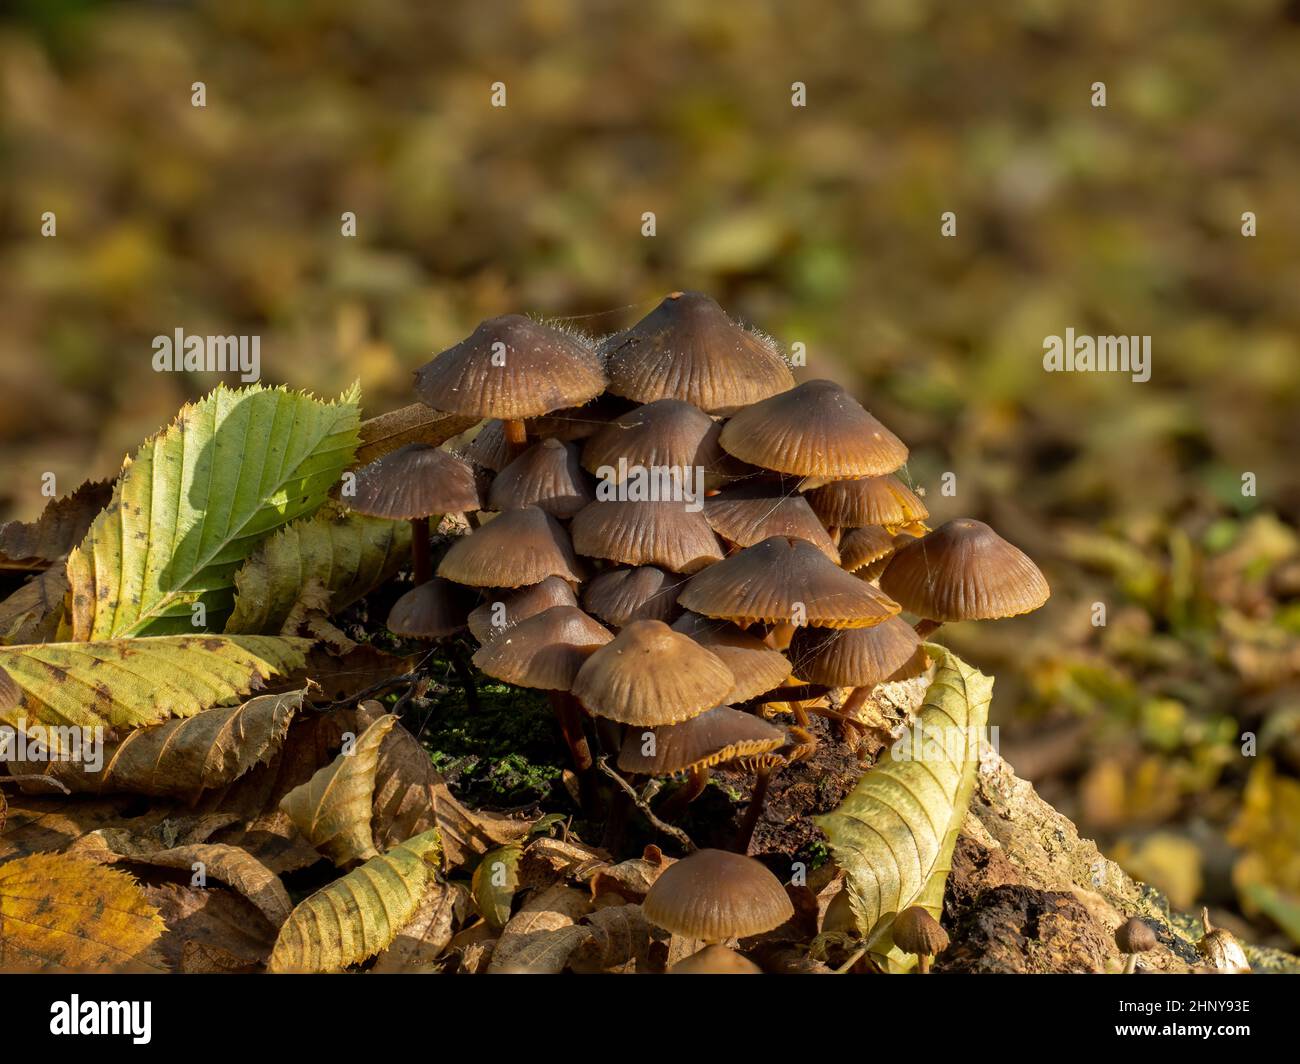 Fungi of Bonnet species in woodland, with Bonnet mould growing on caps. Stock Photo